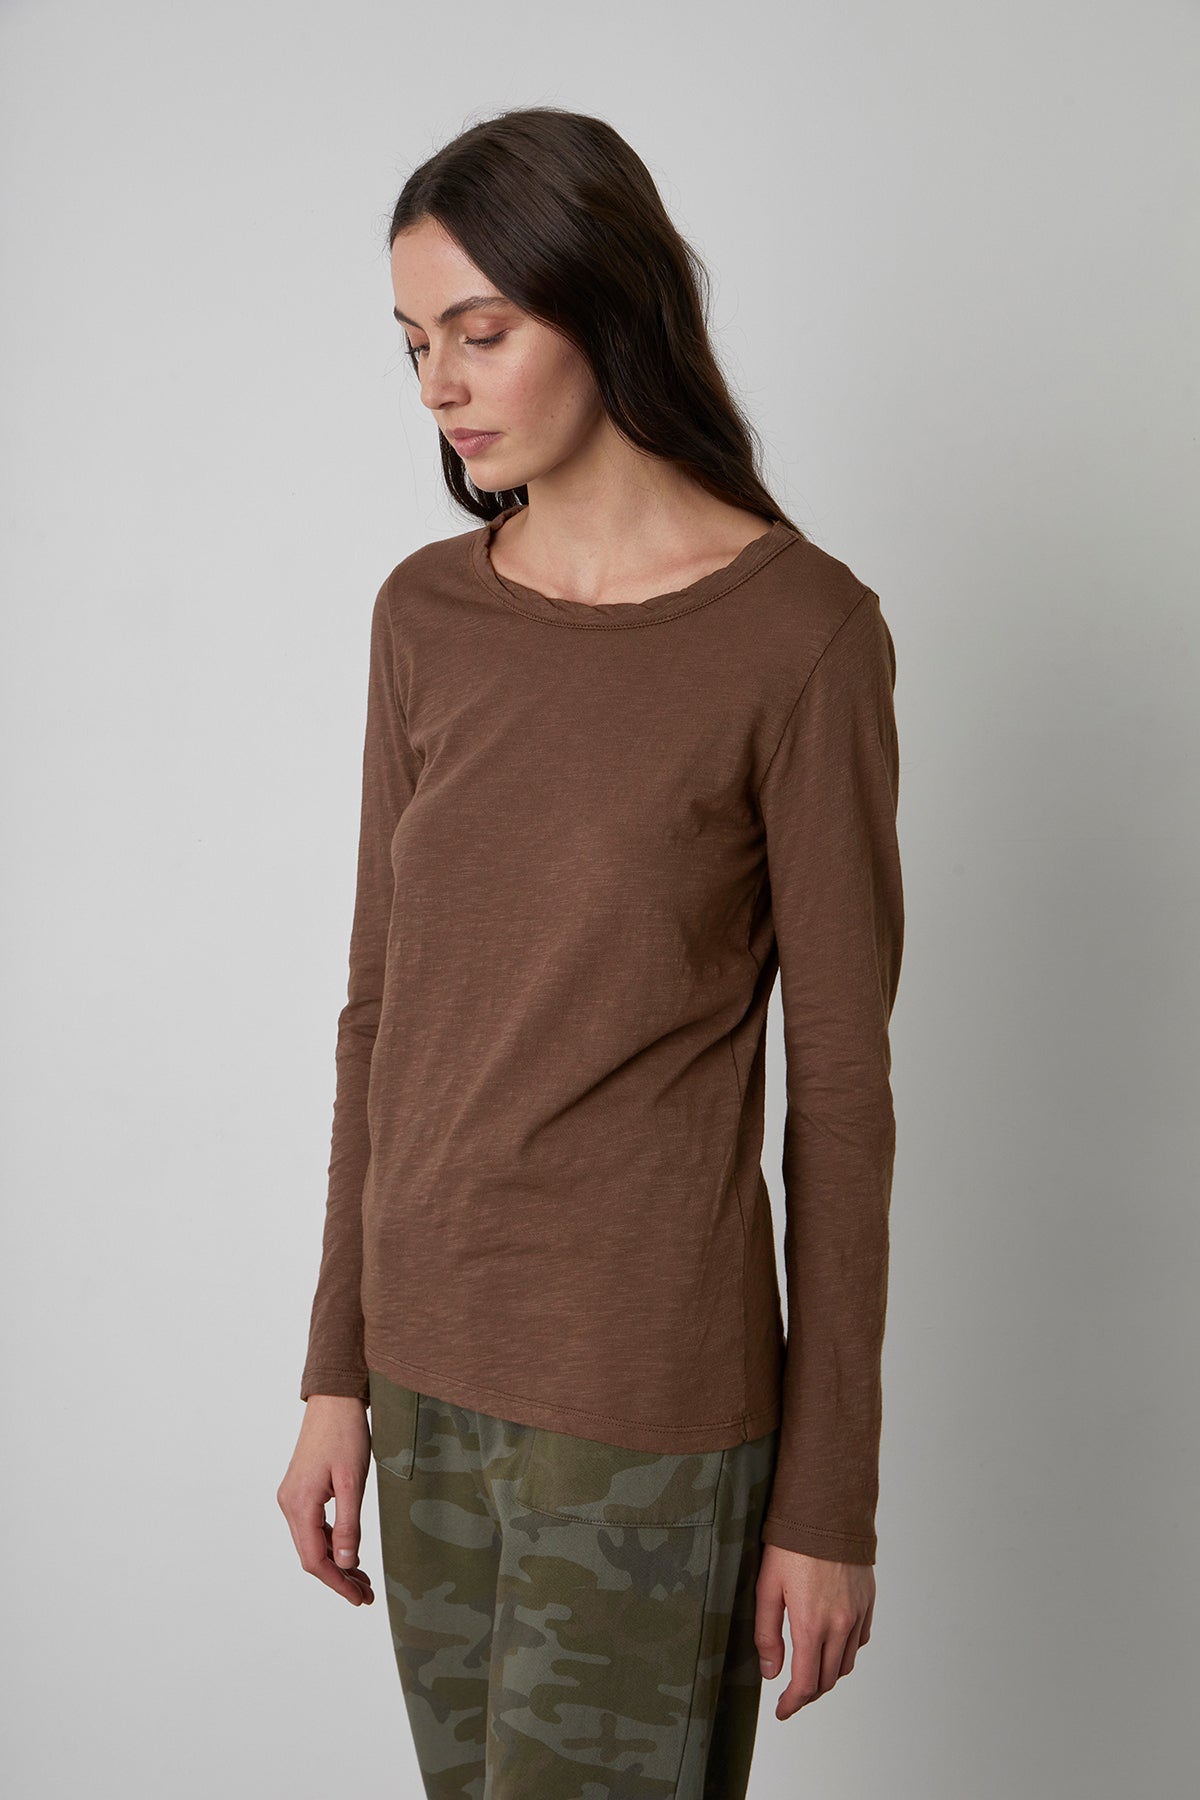 Lizzie Tee Chocolate with Skye Sweatpant Nettle Front & Side-23854432125121